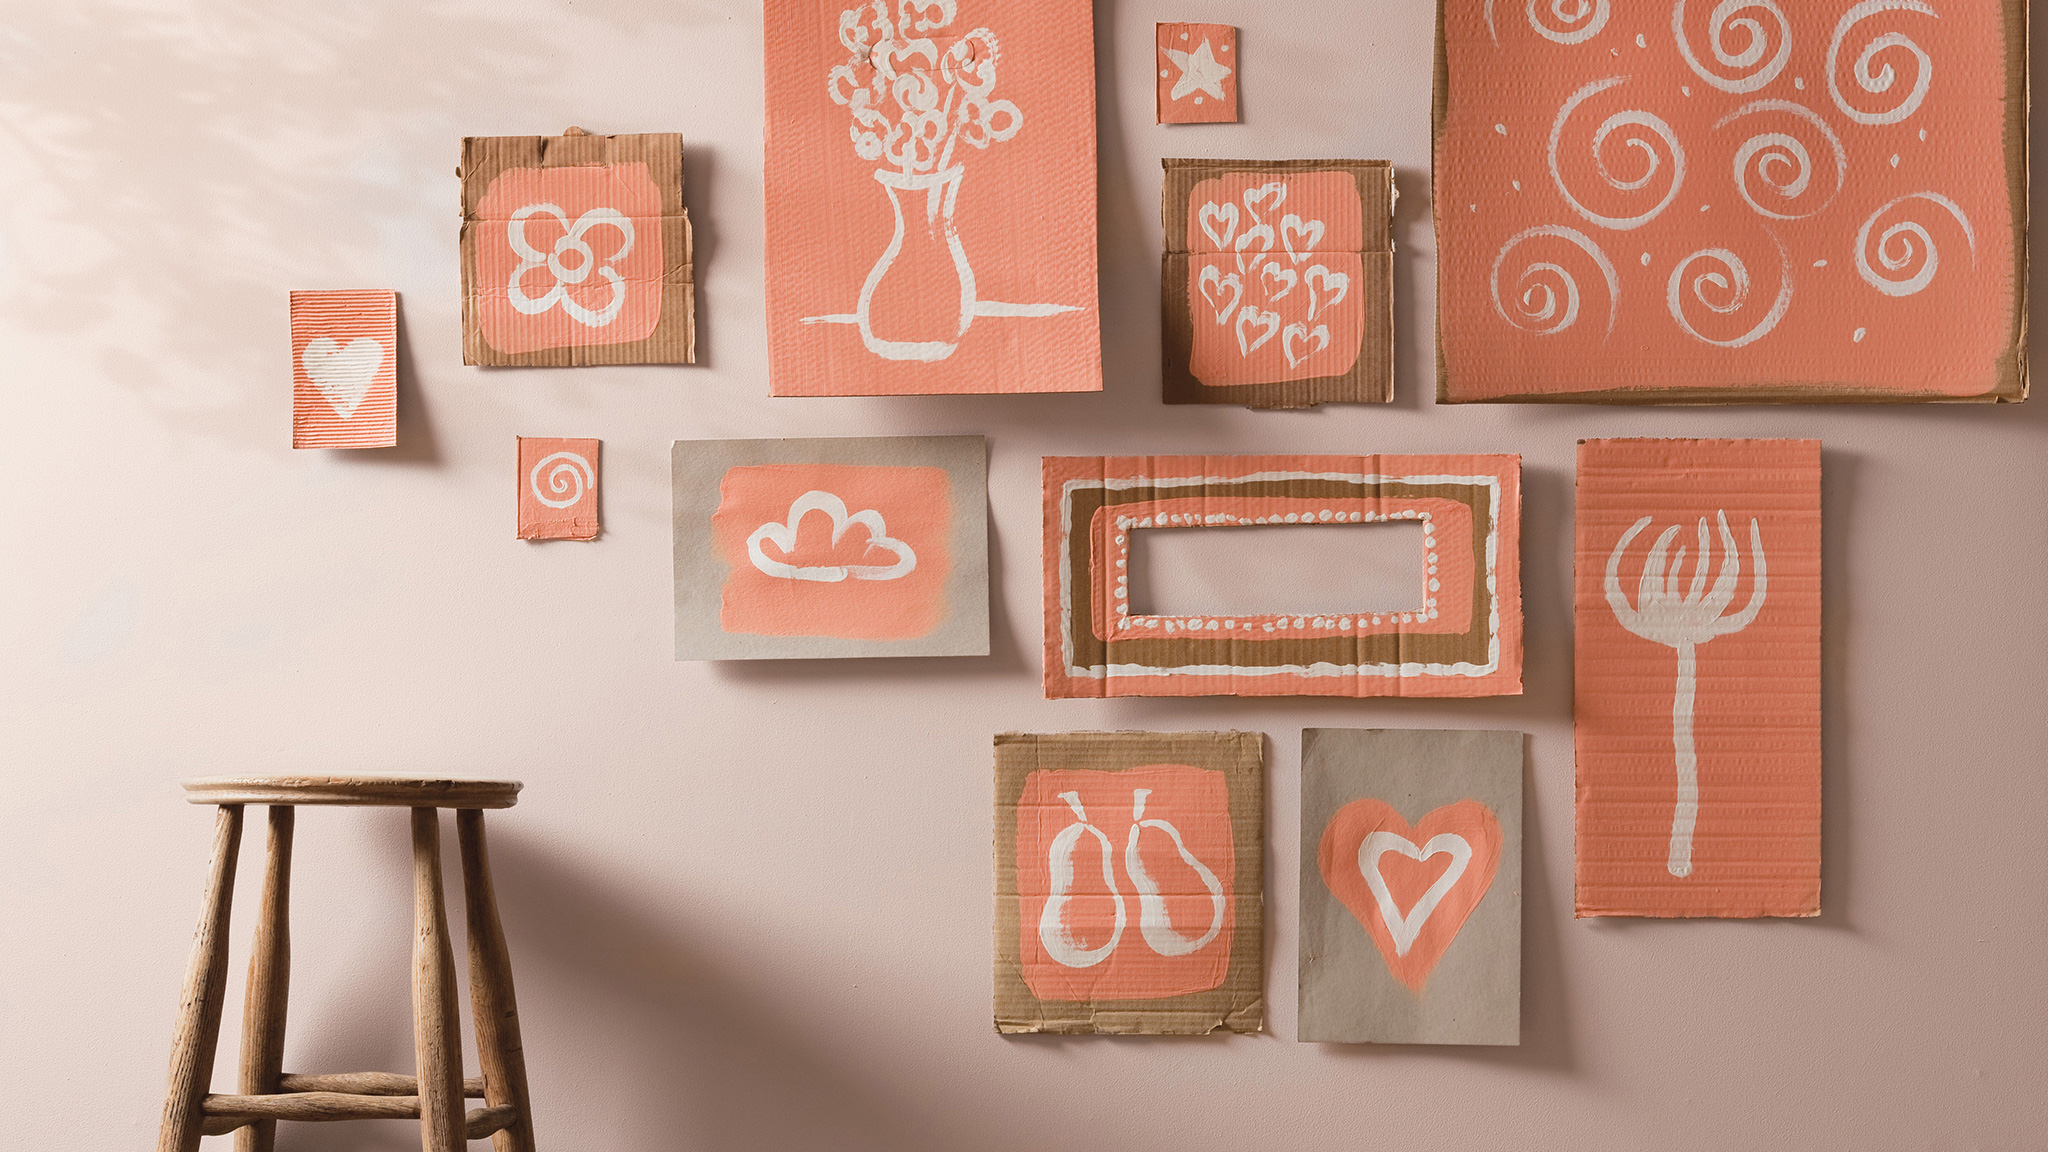 Take inspiration from Claude Monet with a daring orange colour scheme. Citrus shades like coral or tangerine add instant vibrancy, while more muted hues like pumpkin evoke warmth. 